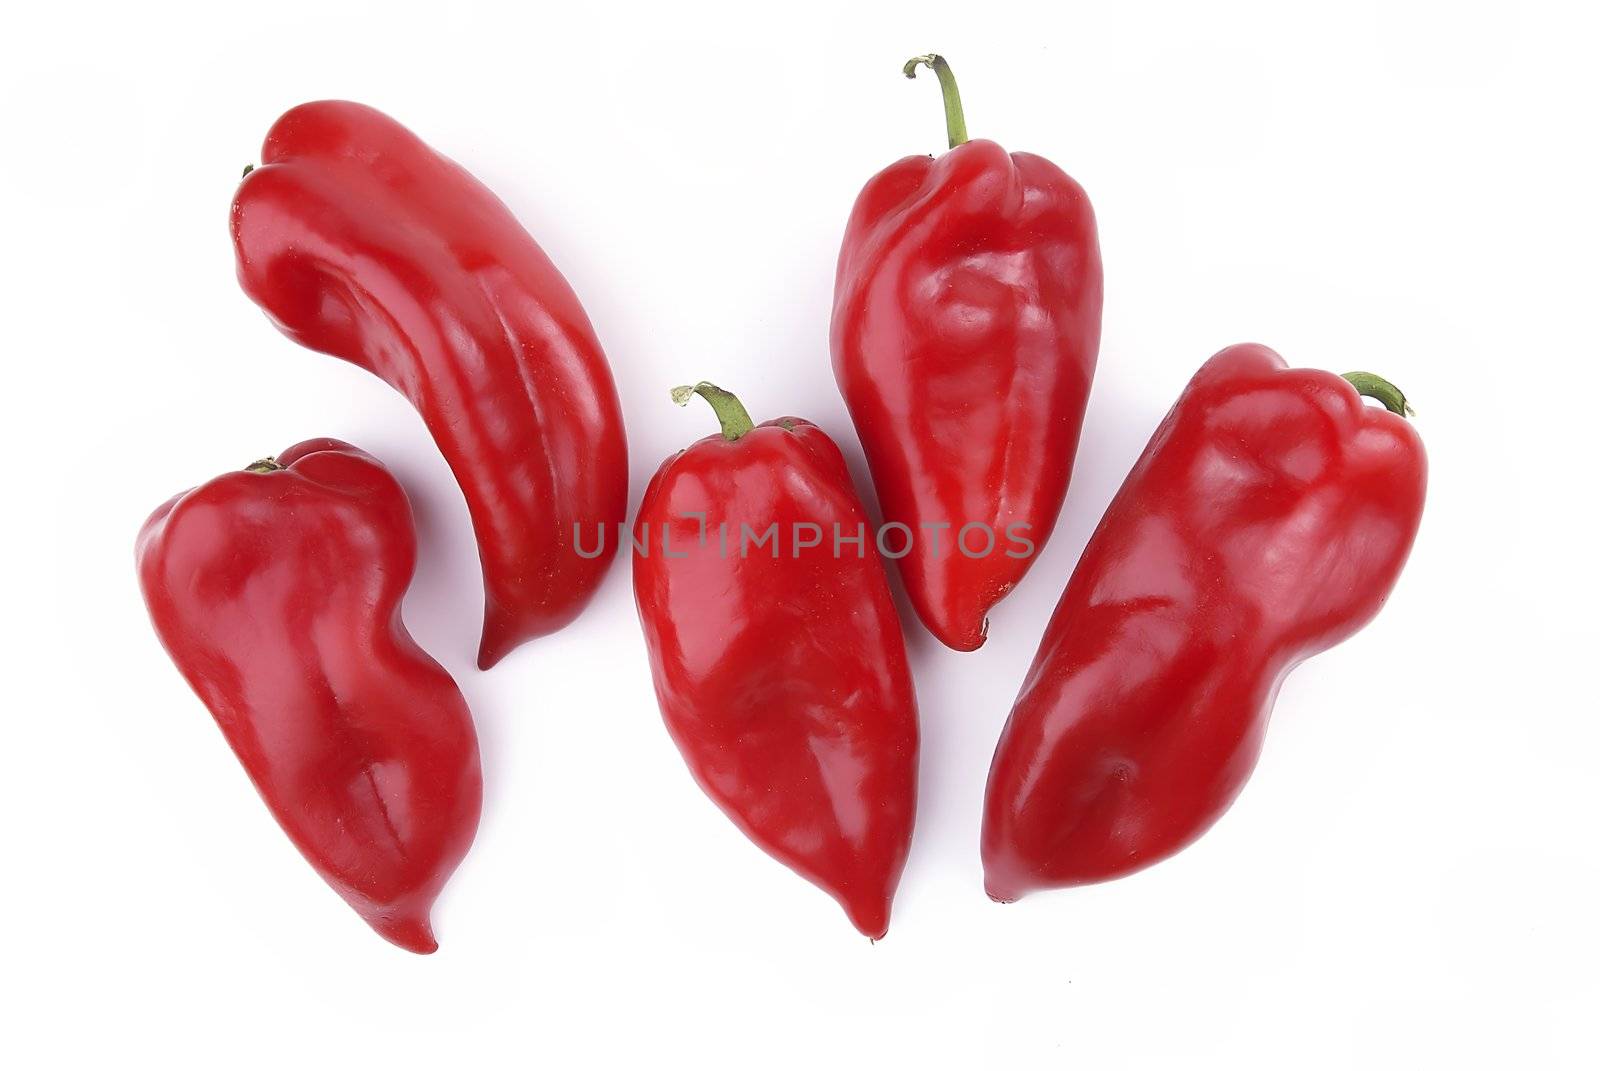 Fifth Peppers in group on white background